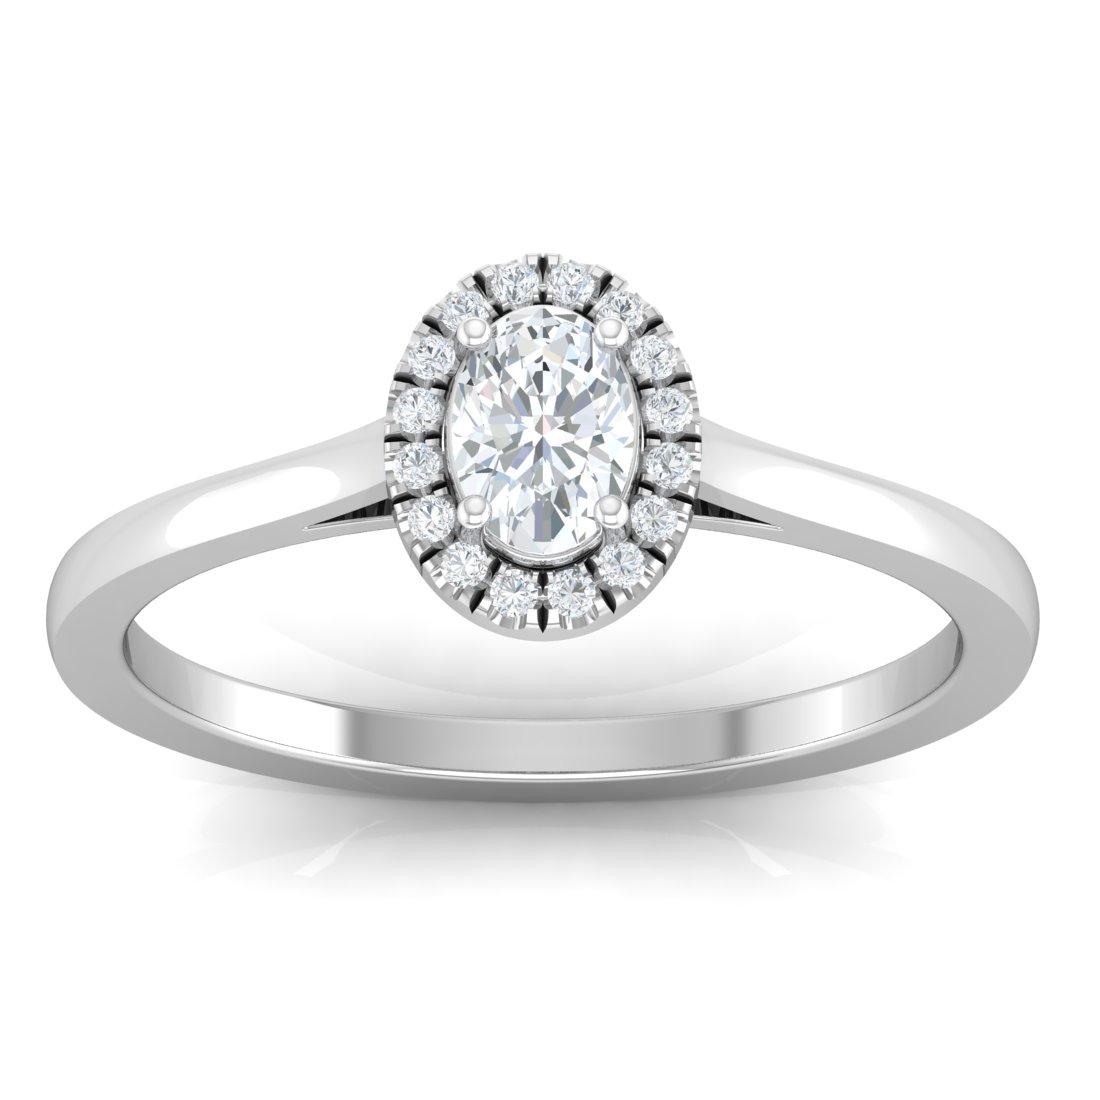 Engagement Rings Made of White Gold | Halo diamond ring white gold